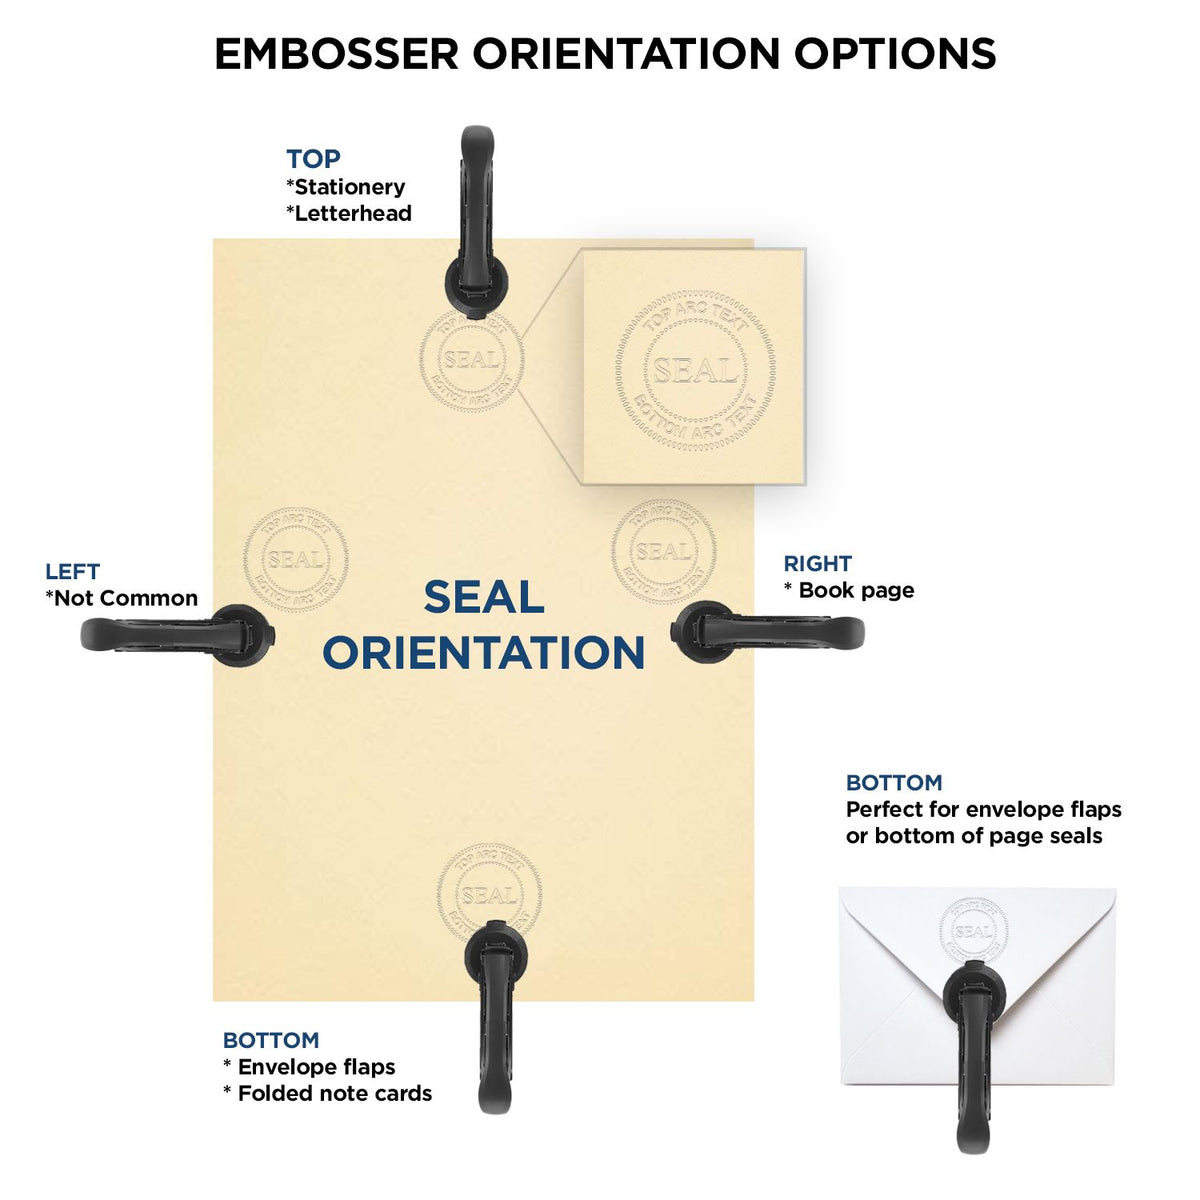 An infographic for the State of Nevada Extended Long Reach Engineer Seal showing embosser orientation, this is showing examples of a top, bottom, right and left insert.